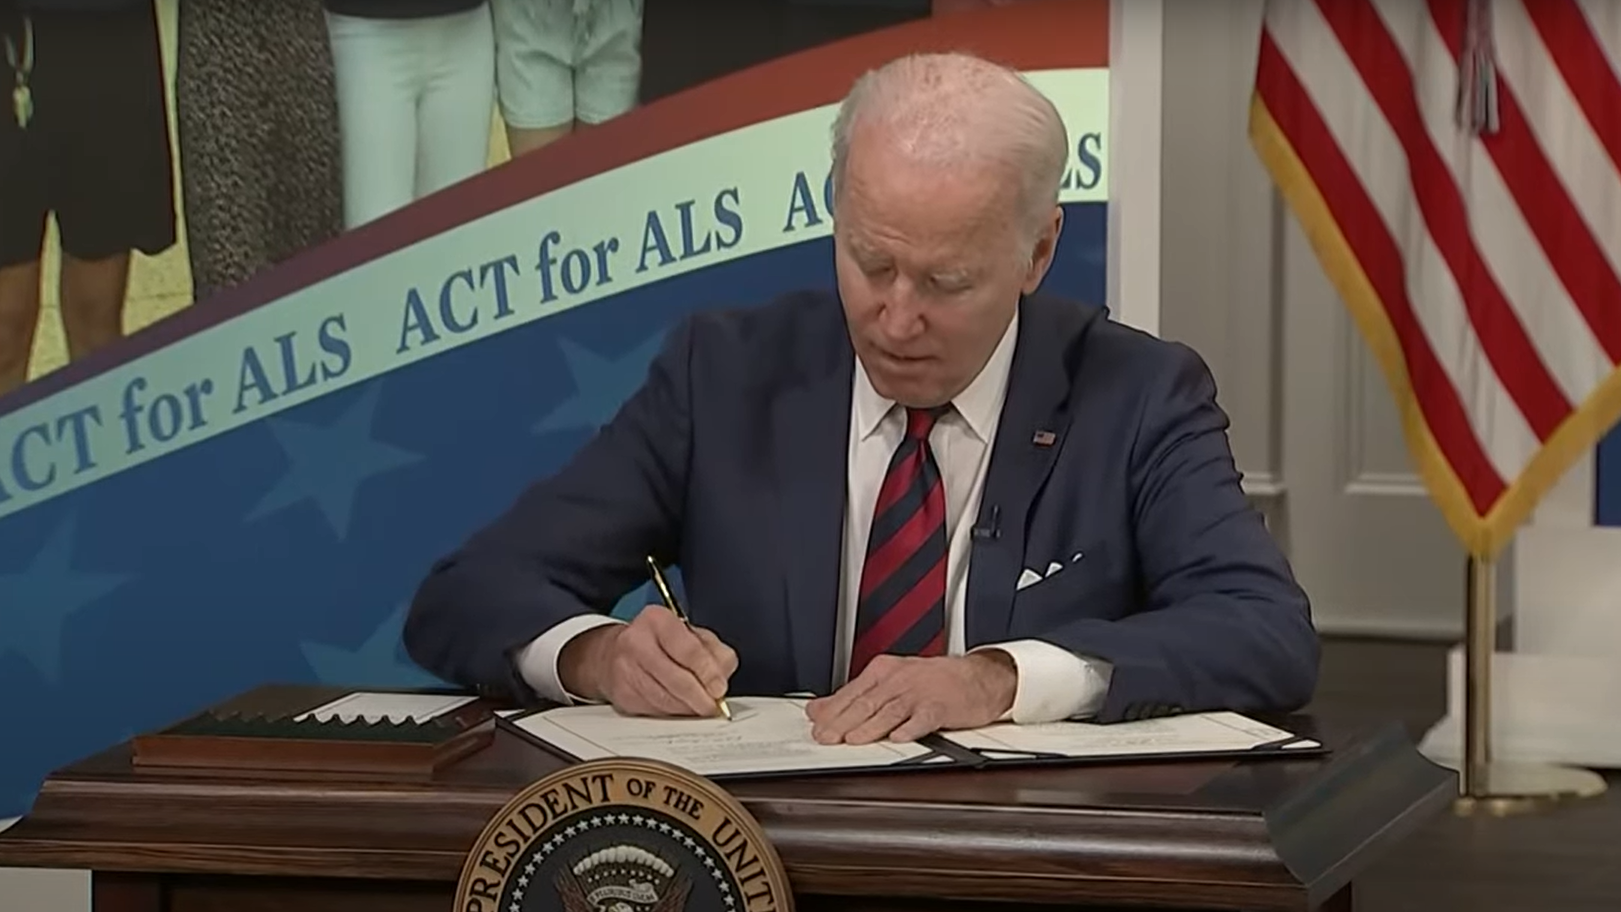 President Biden Signs The Accelerating Access to Critical Therapies for ALS Act Into Law